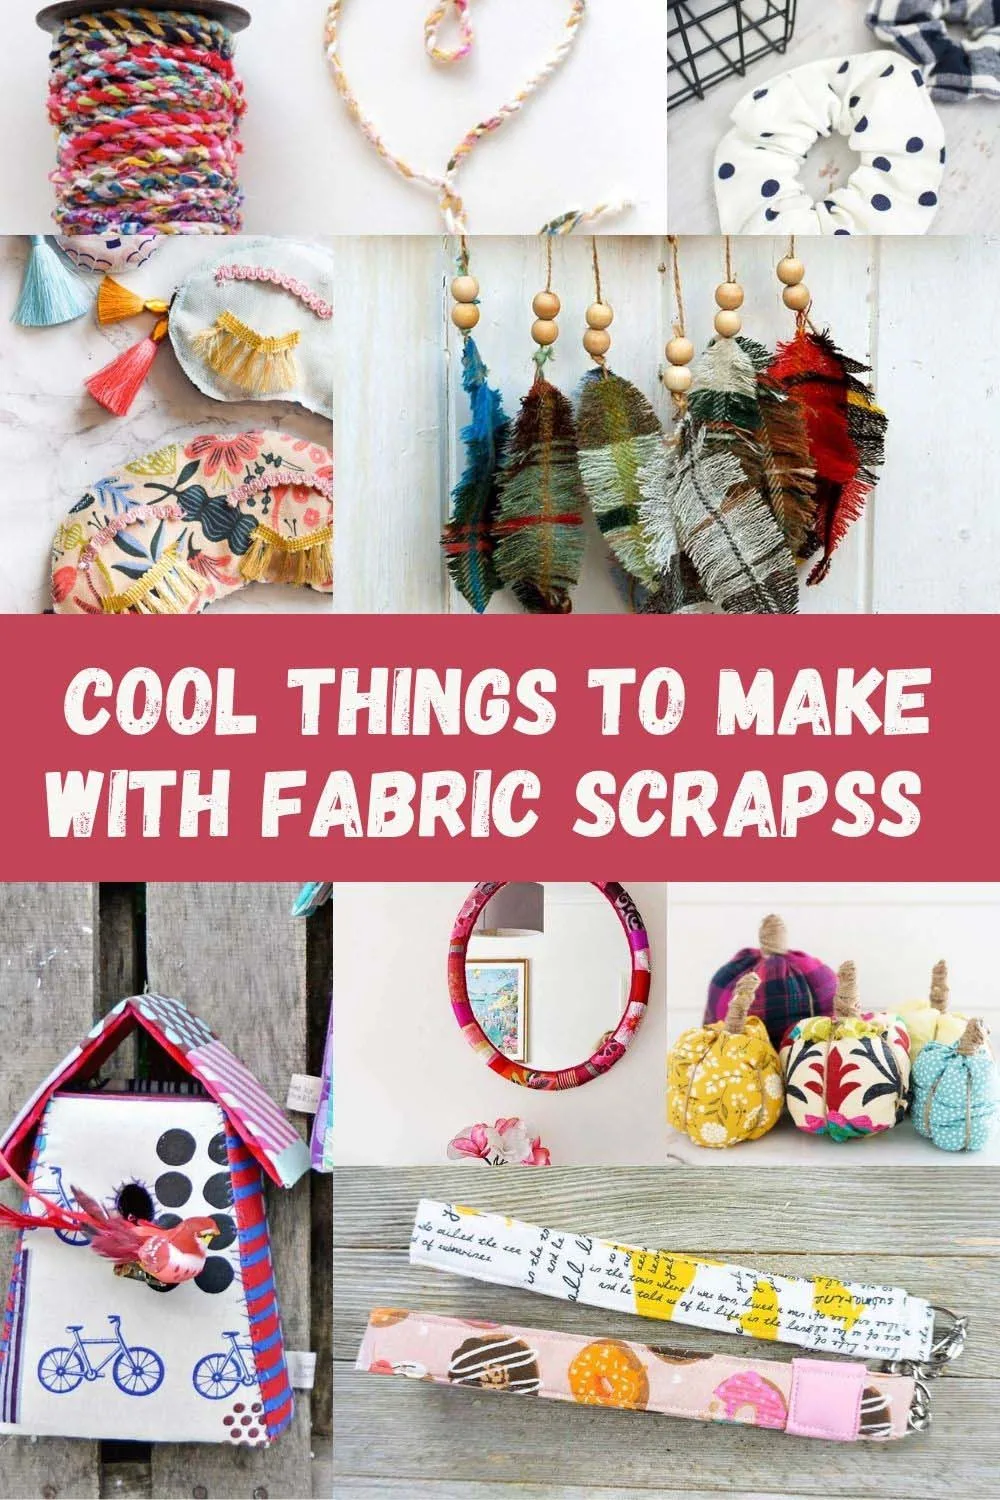 https://www.pillarboxblue.com/wp-content/uploads/2021/10/things-to-make-with-fabric-scraps-pin.jpg.webp